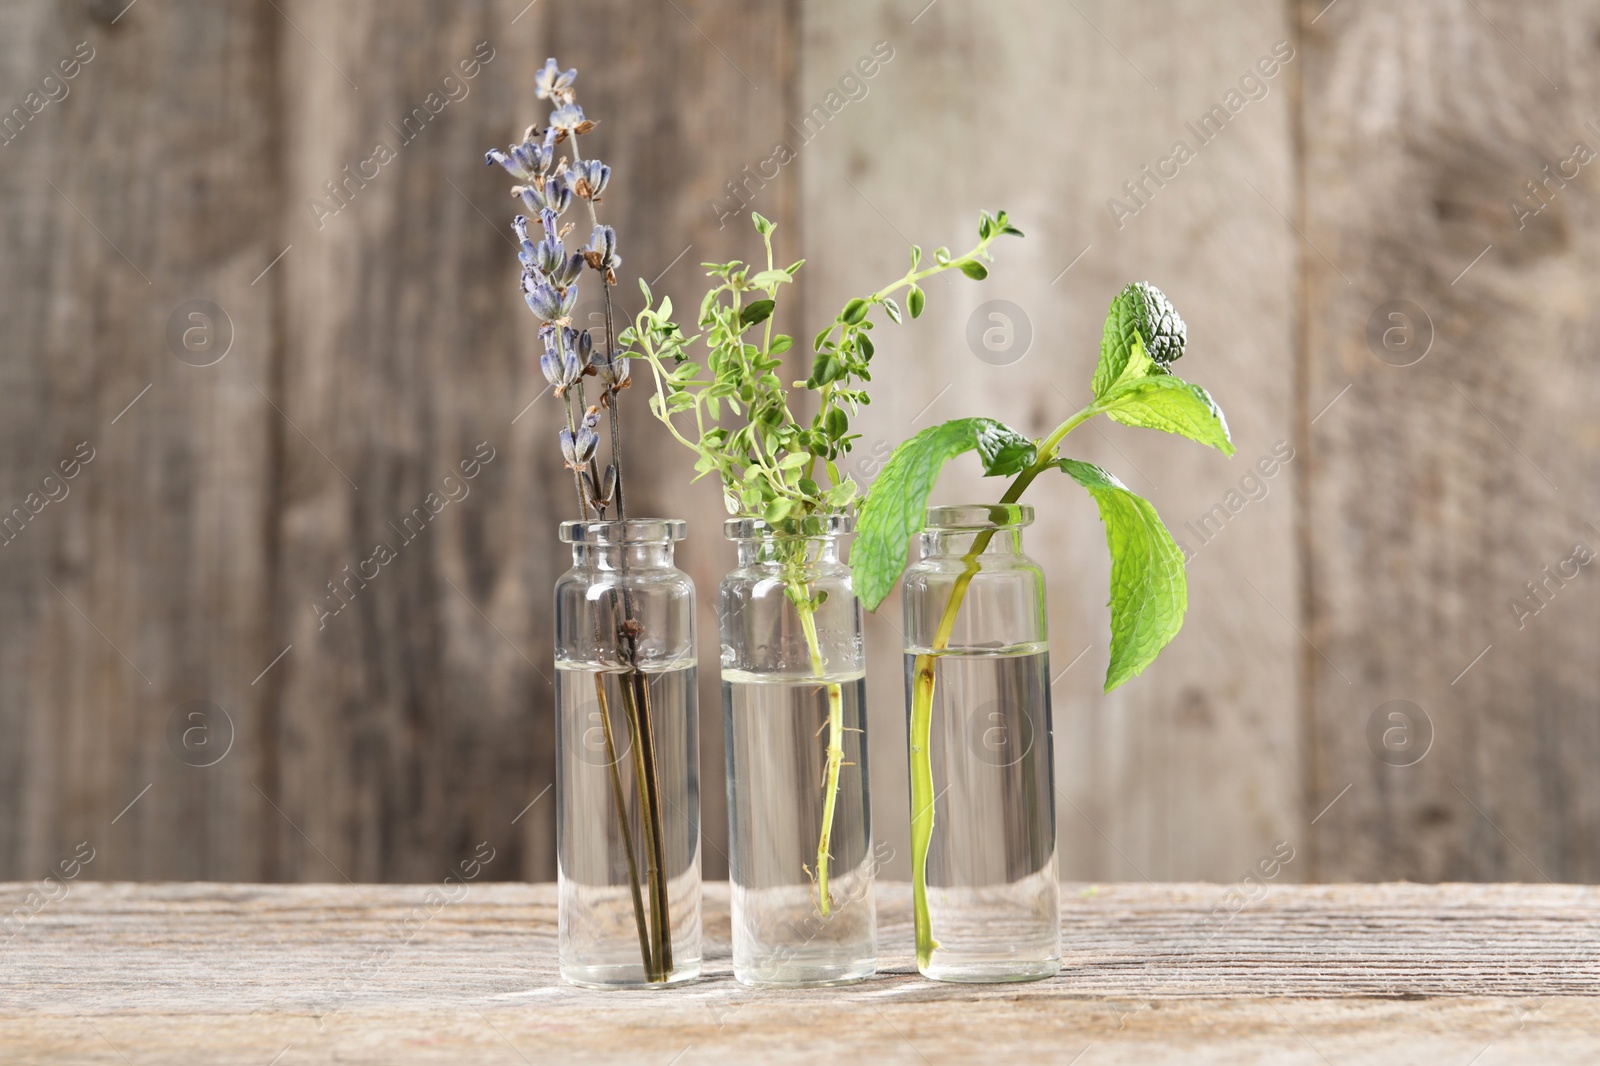 Photo of Bottles with essential oils and plants on wooden table